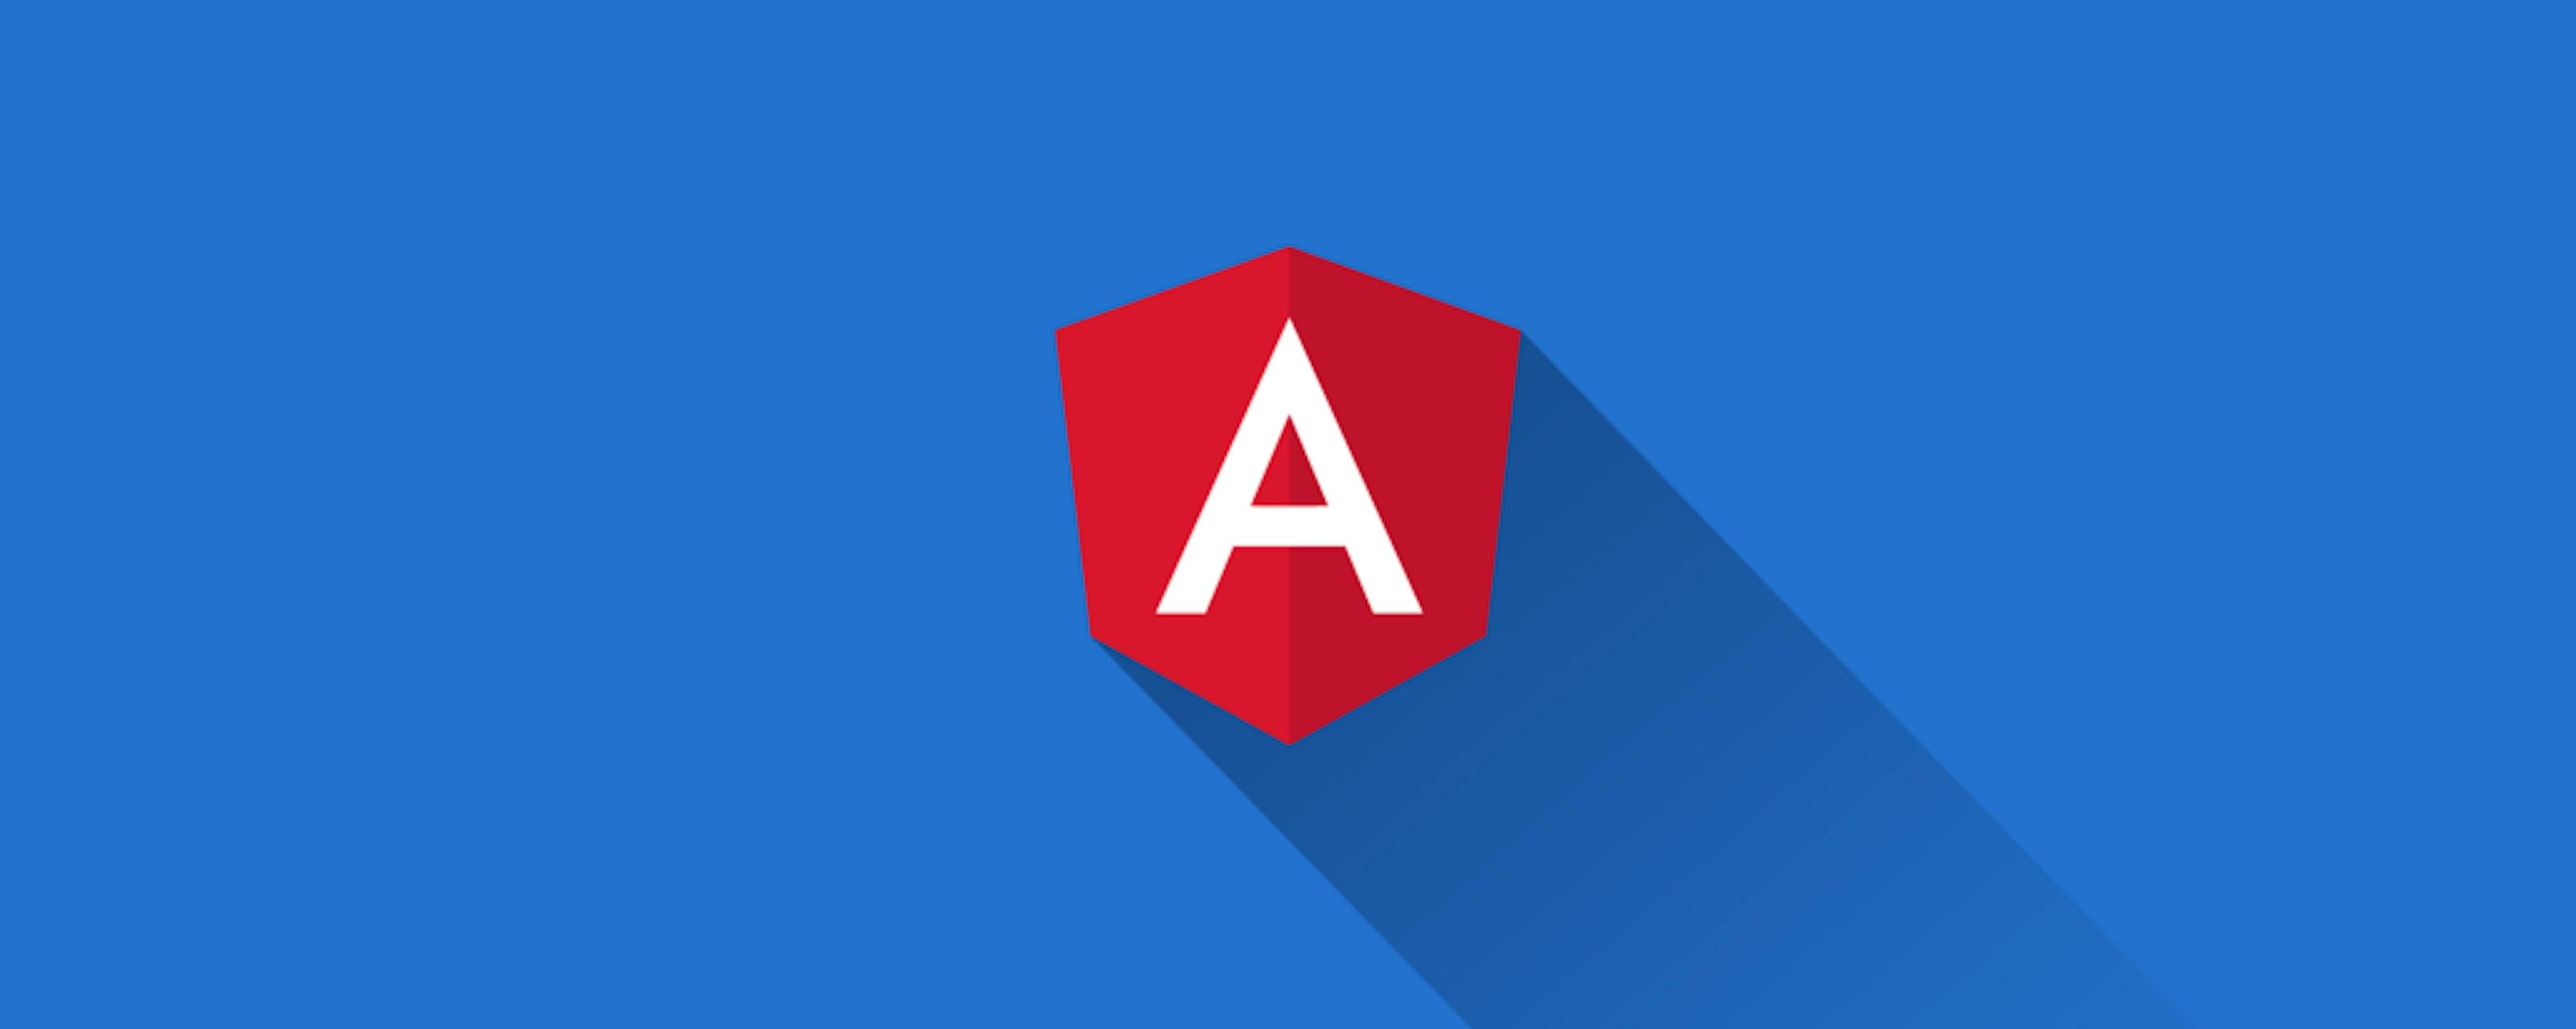 /using-angular-httpclient-the-right-way-60c65146e5d9 feature image